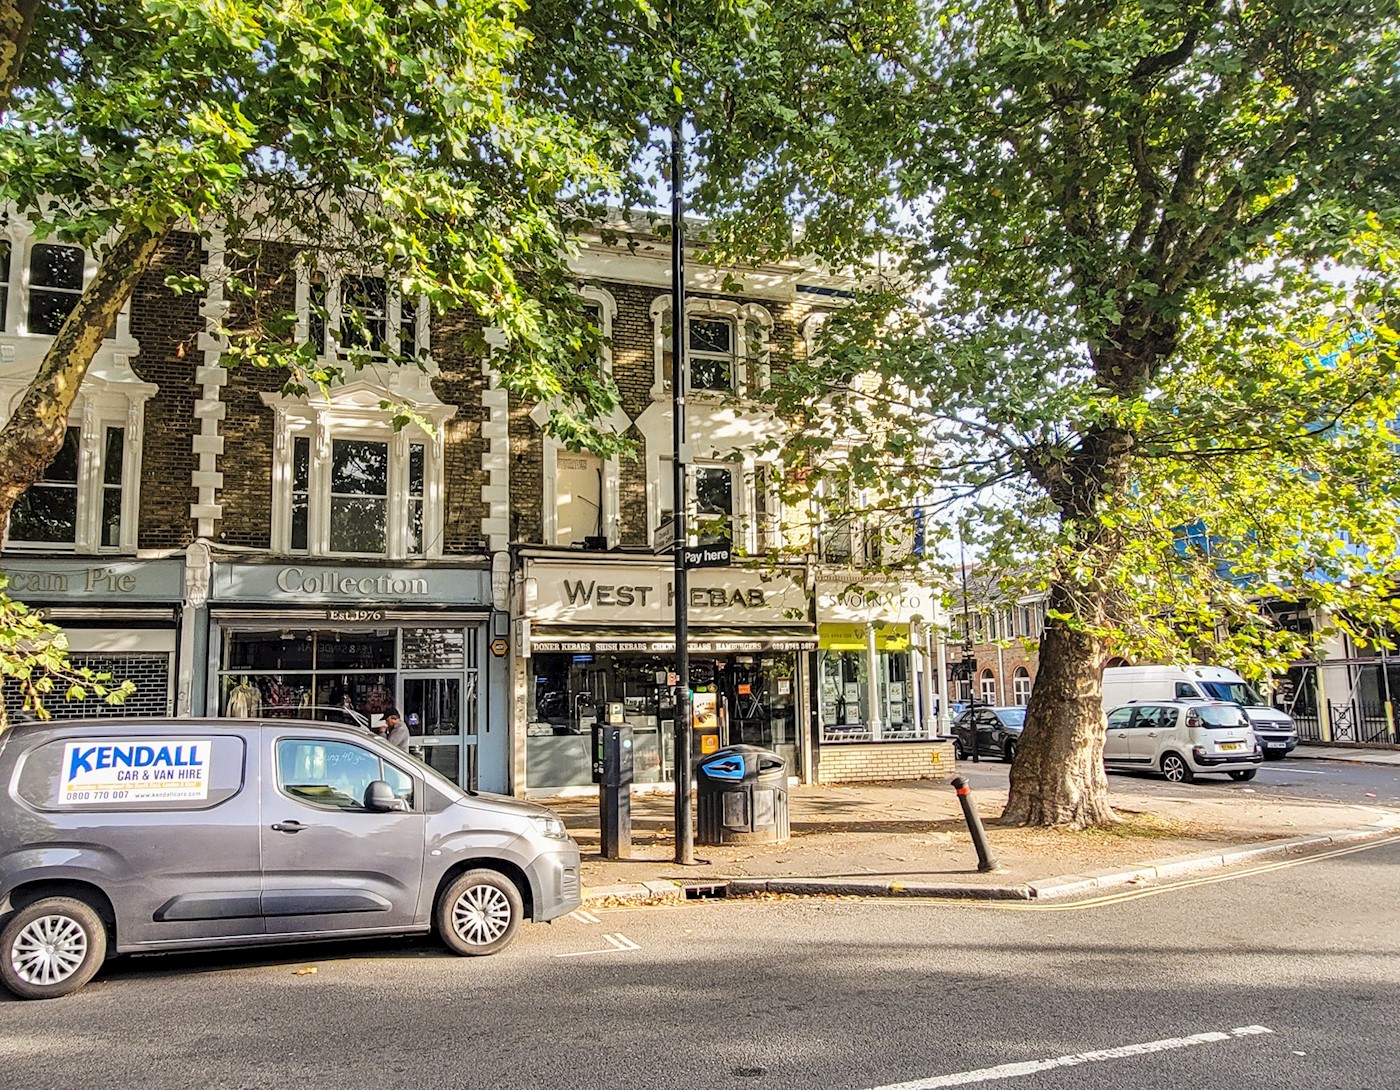 196 Chiswick High Road, Chiswick, W4 1PD 1/9